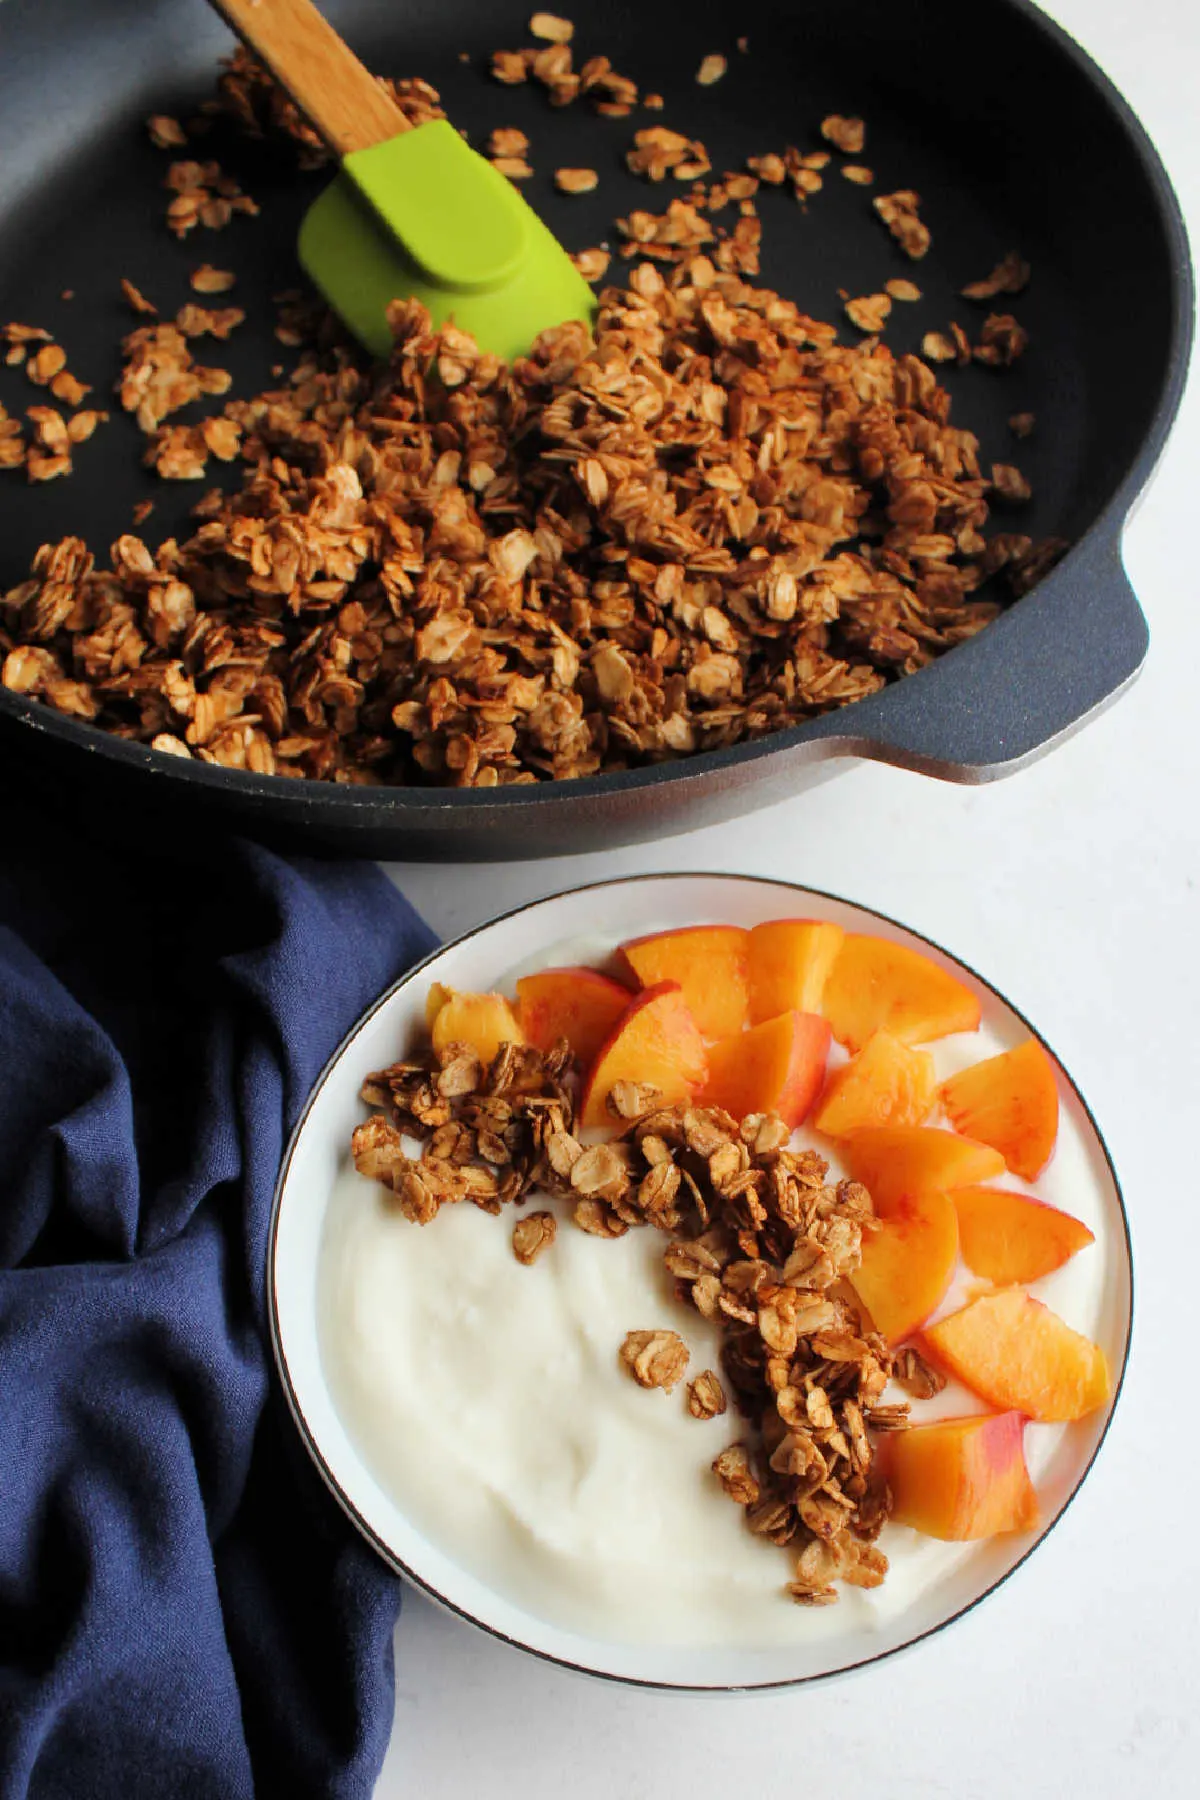 Bowl of yogurt with granola and peaches in front of skillet of remaining granola.